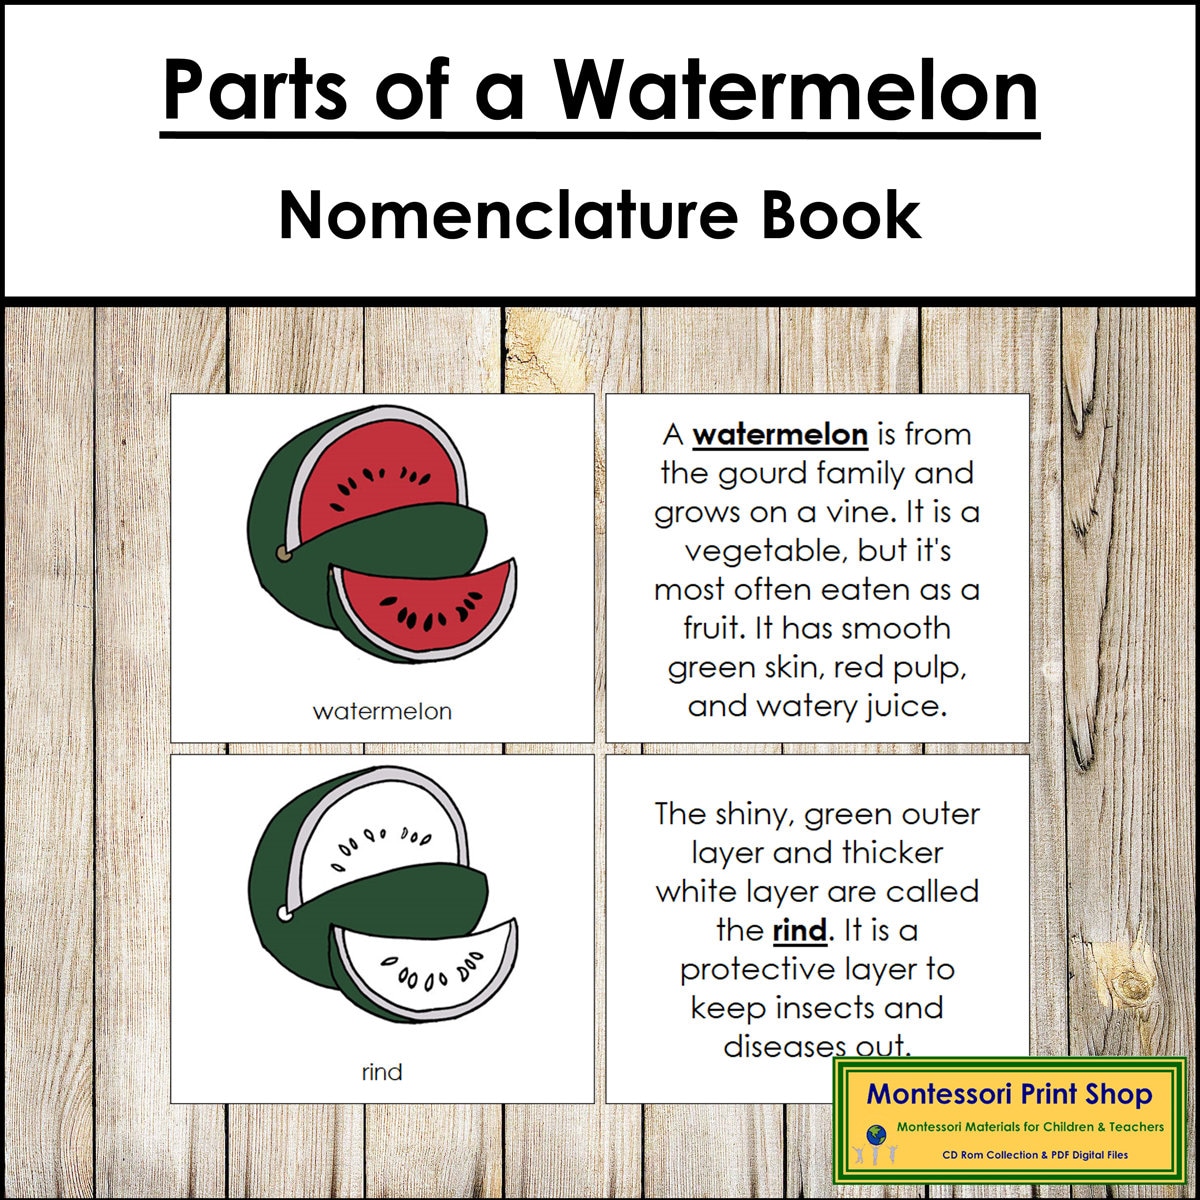 Parts of a Watermelon Nomenclature Book Botany Printable photo